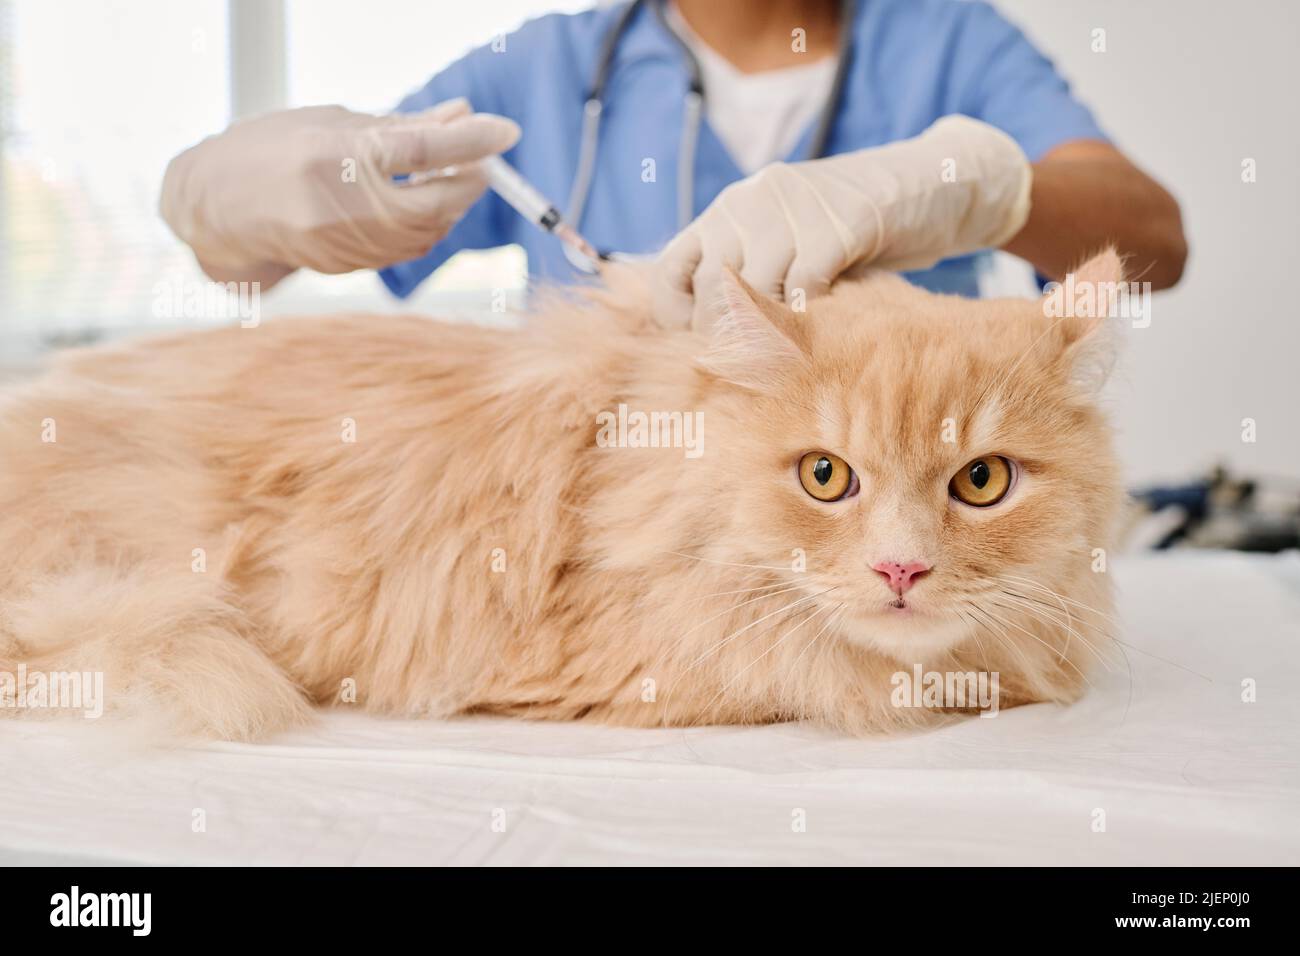 Medium close-up selective shot of unrecognizable doctor giving vaccine injection to ginger cat in veterinary clinic Stock Photo